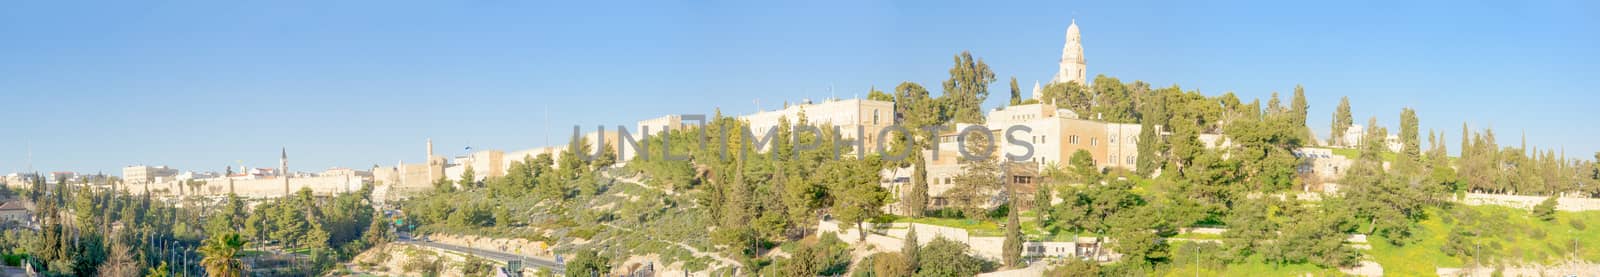 Panoramic view of the old city of Jerusalem, with the wall, tower of David and Mount Zion. Jerusalem, Israel